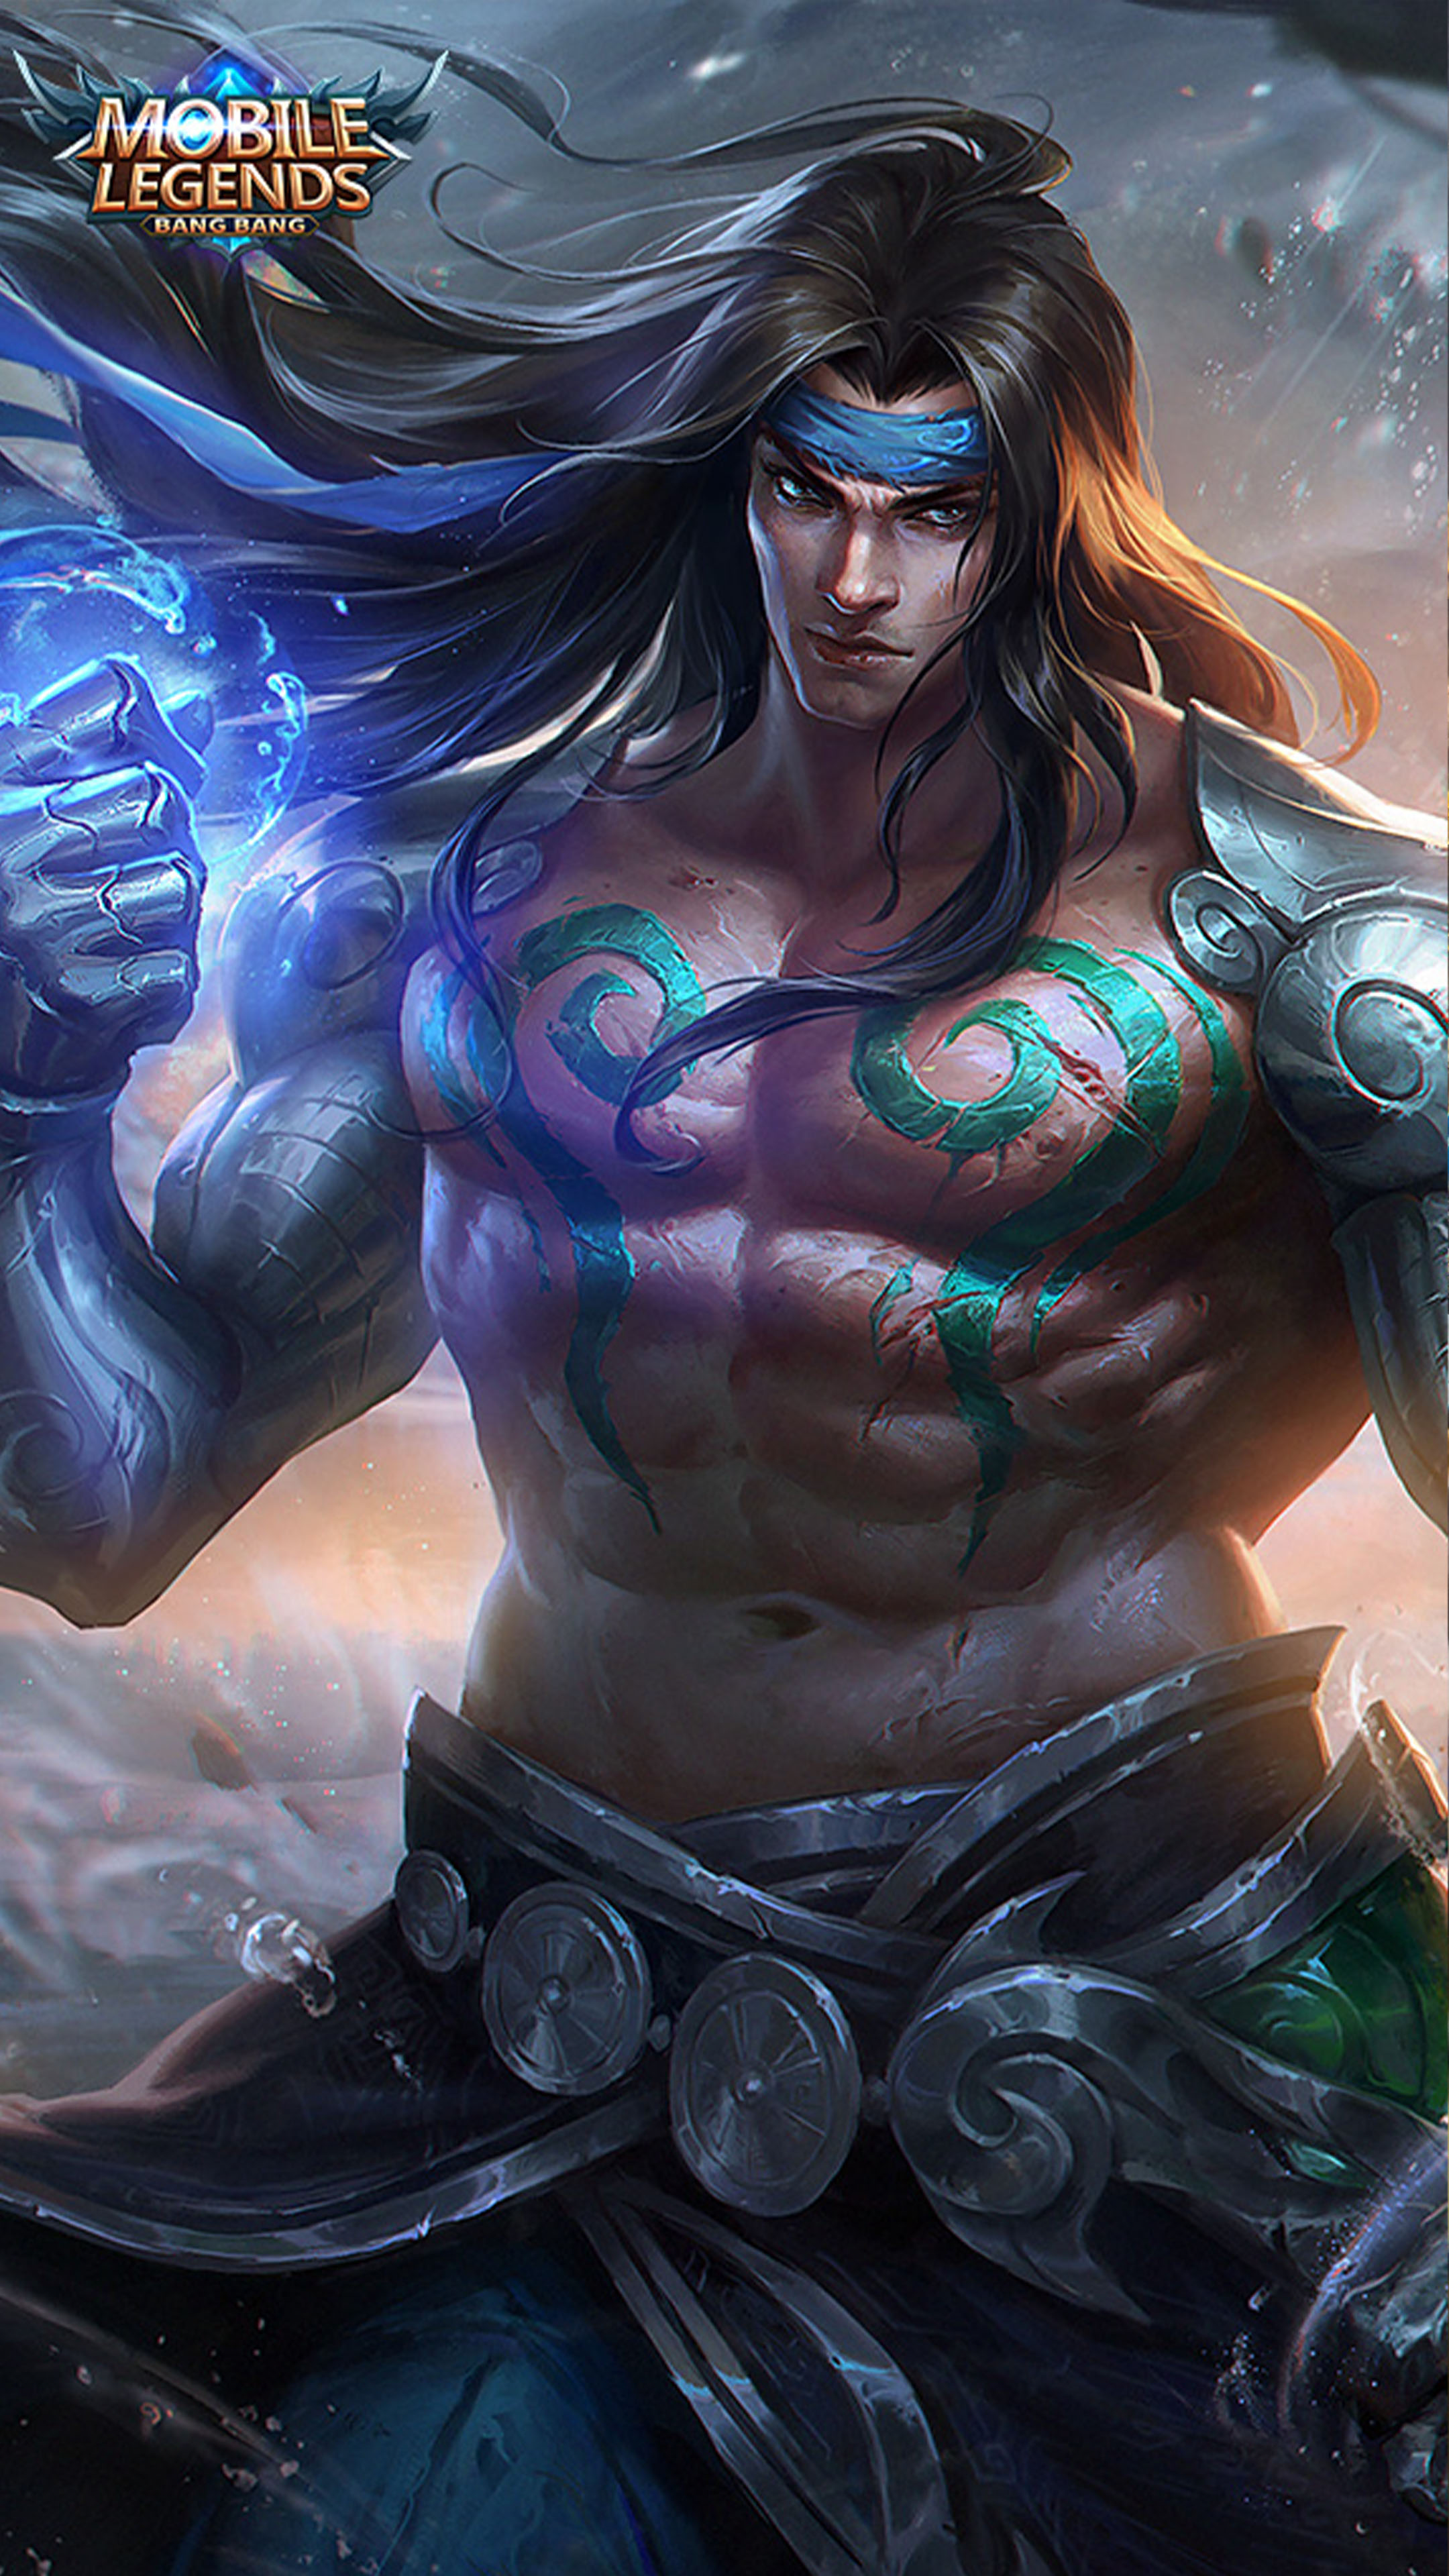 Download Wallpaper Mobile Legend Hd For Android